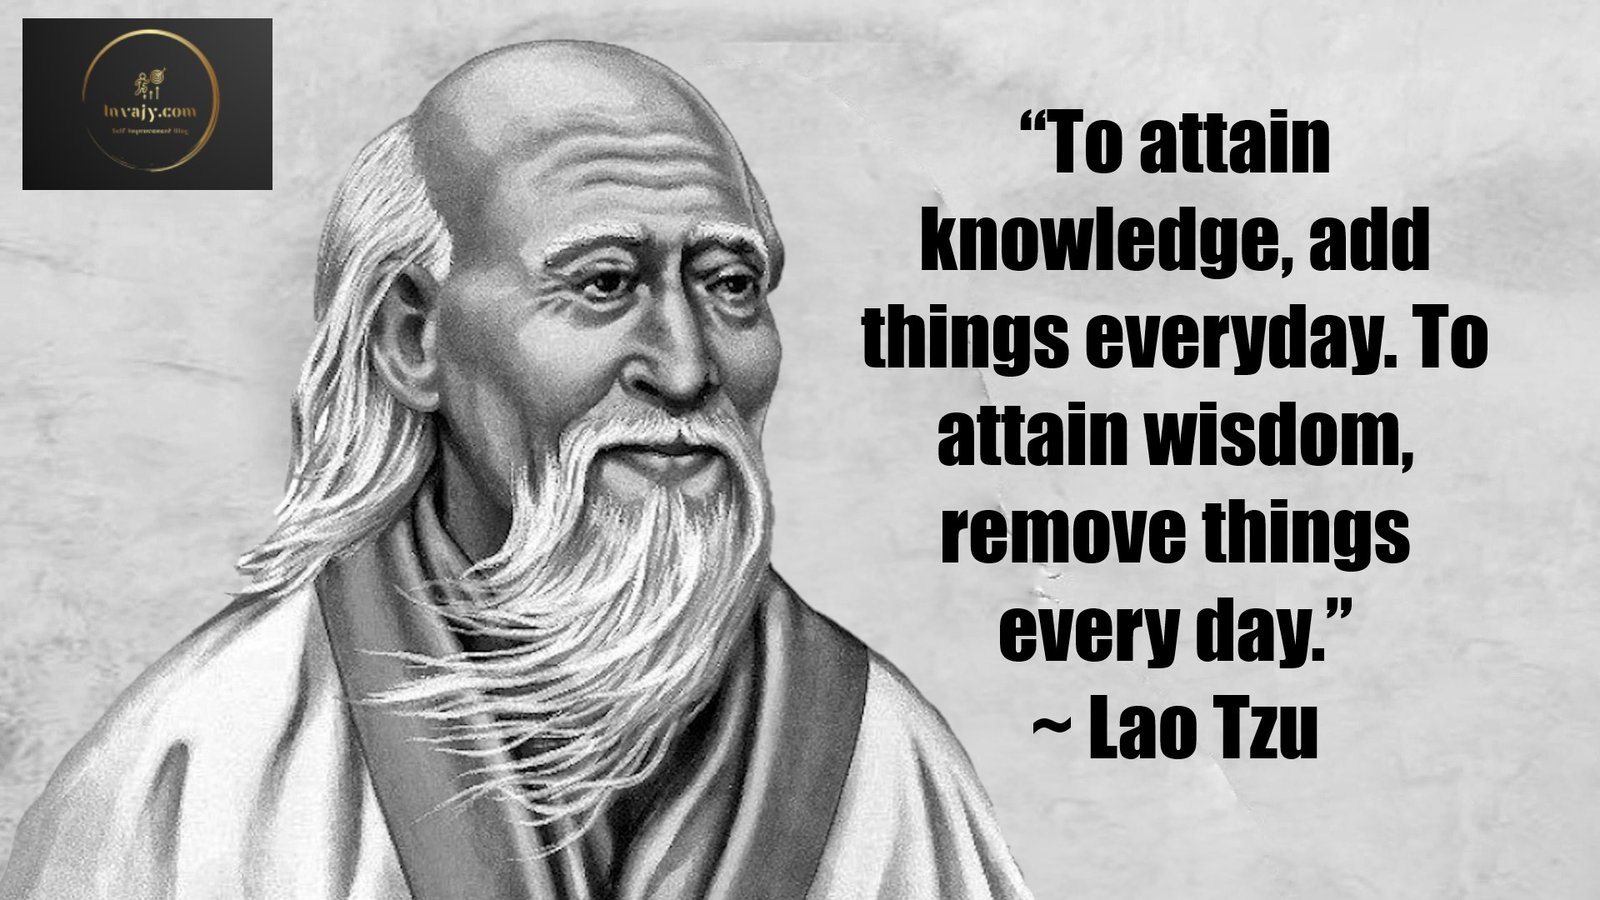 125 Lao Tzu Quotes, Sayings & Wisdom Words for inspiration